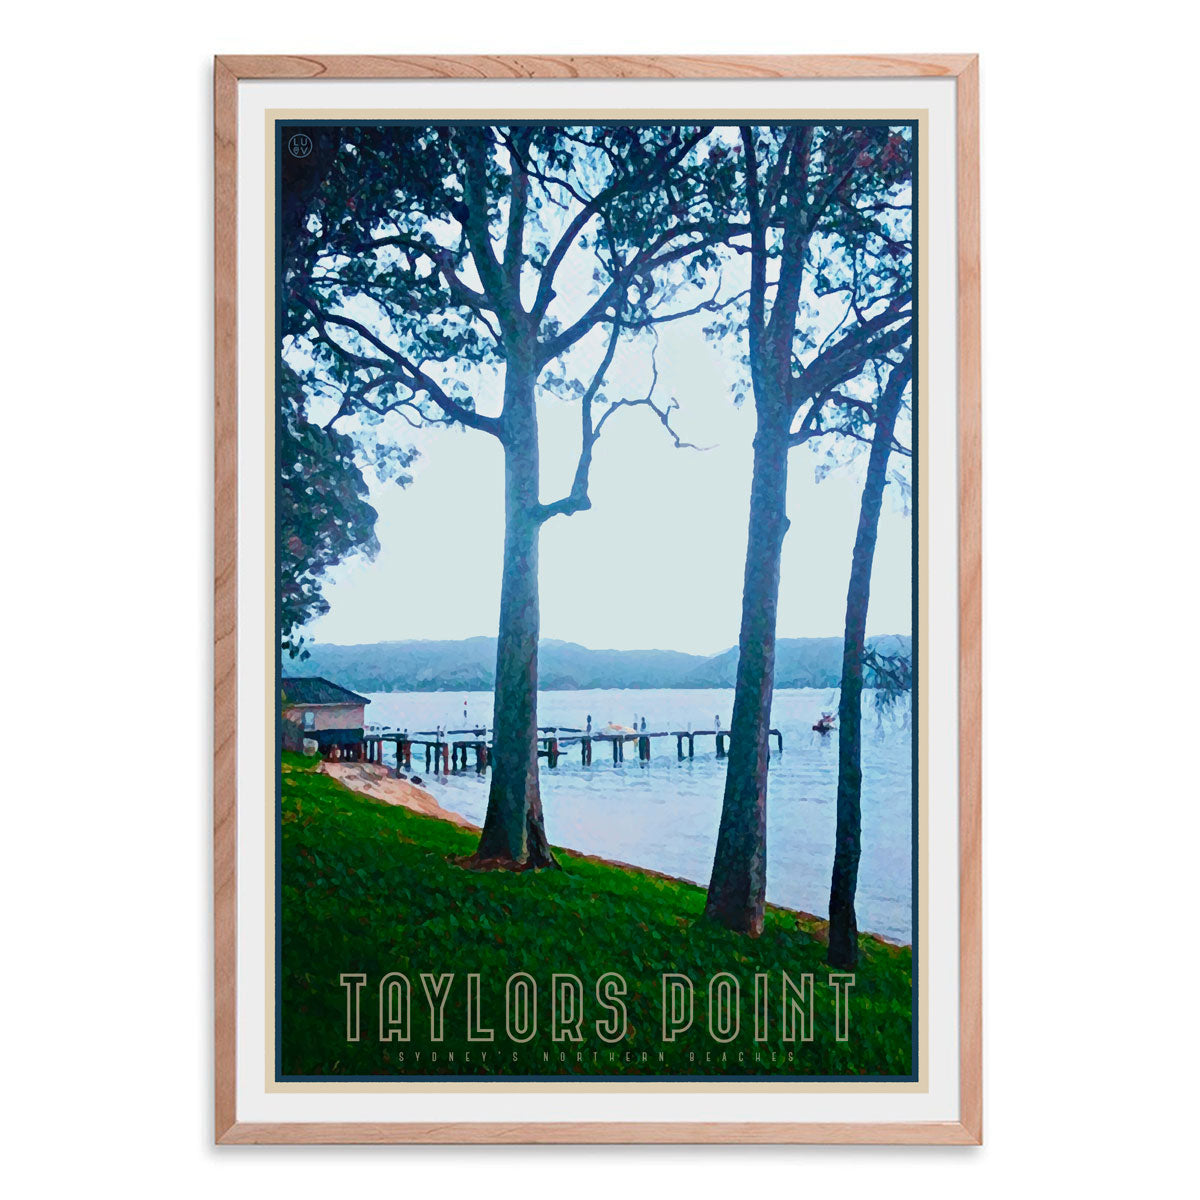 Travel style poster - Taylors Point Gums poster - original design by placesweluv